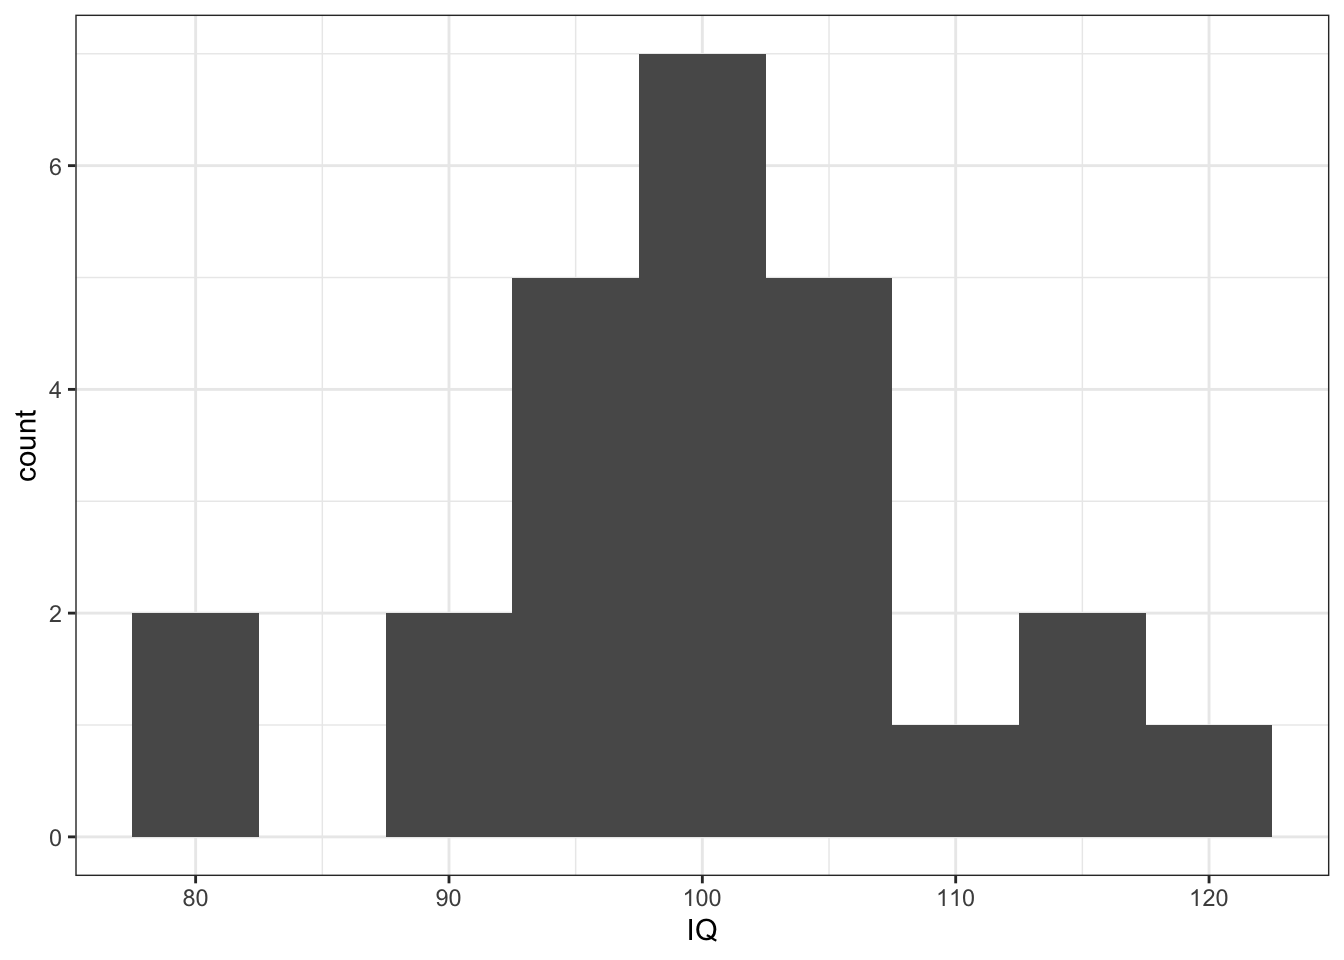 Histogram showing the distribution of IQ Scores from Miller and Haden (2013)